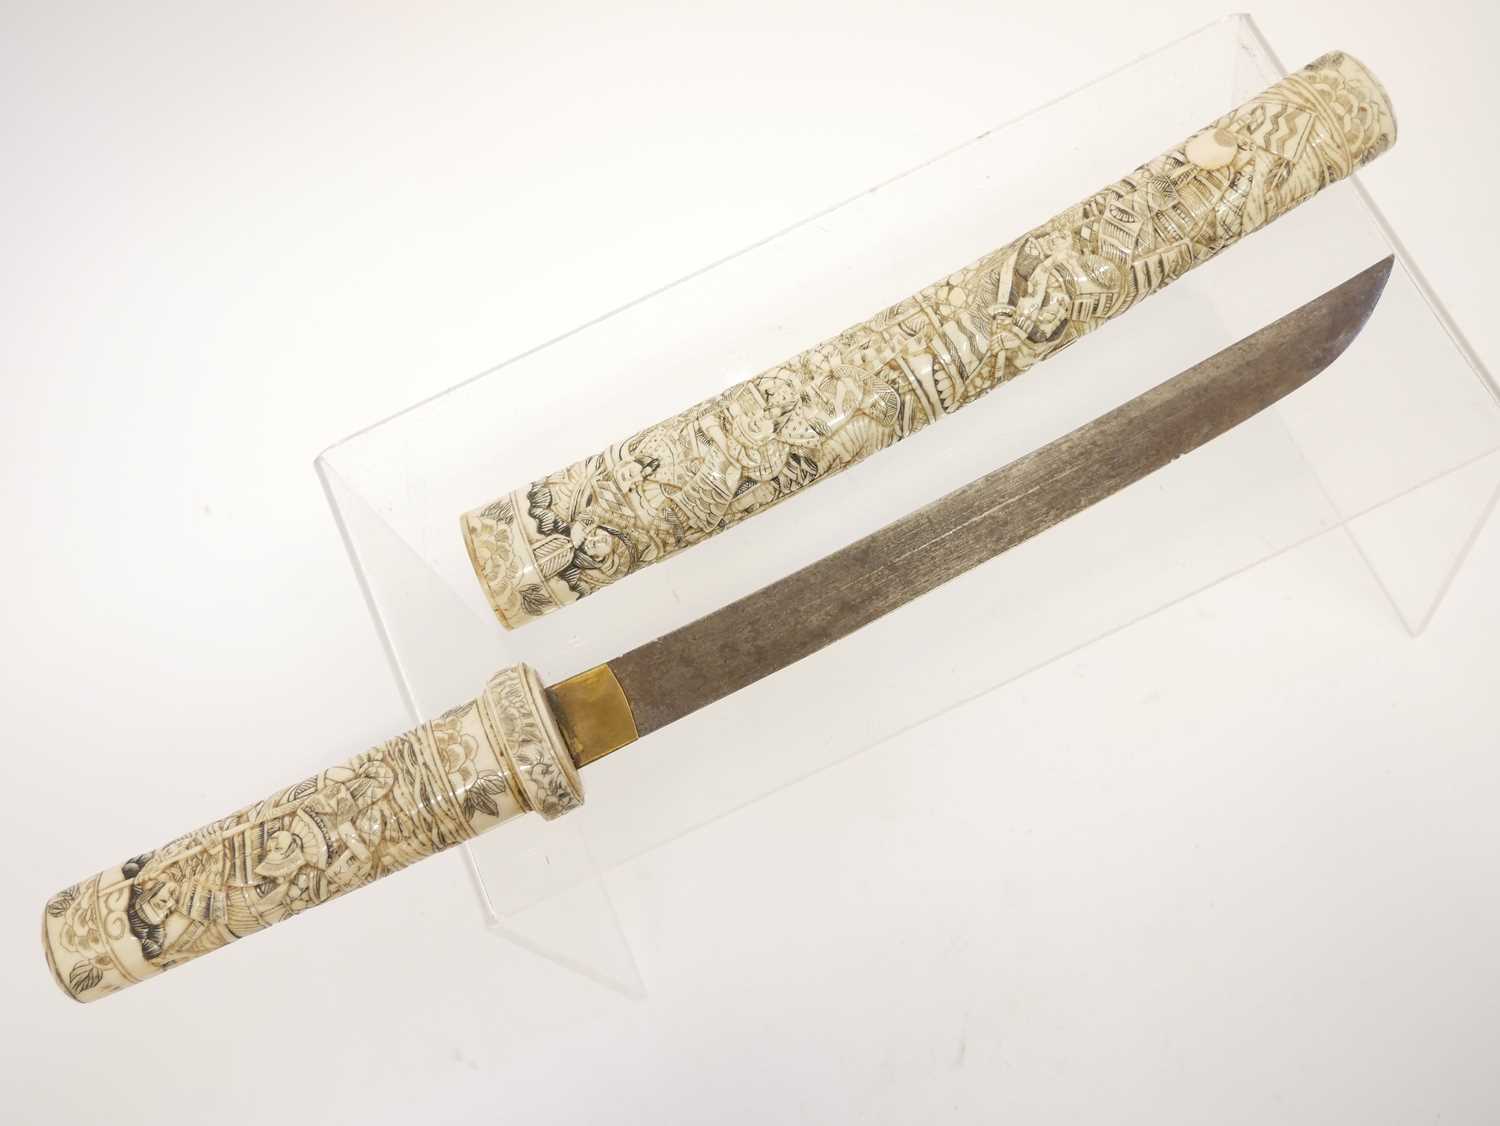 Japanese bone mounted tanto dagger, slightly curved 9.5 inch cutting edge blade, the mounts carved - Image 2 of 16